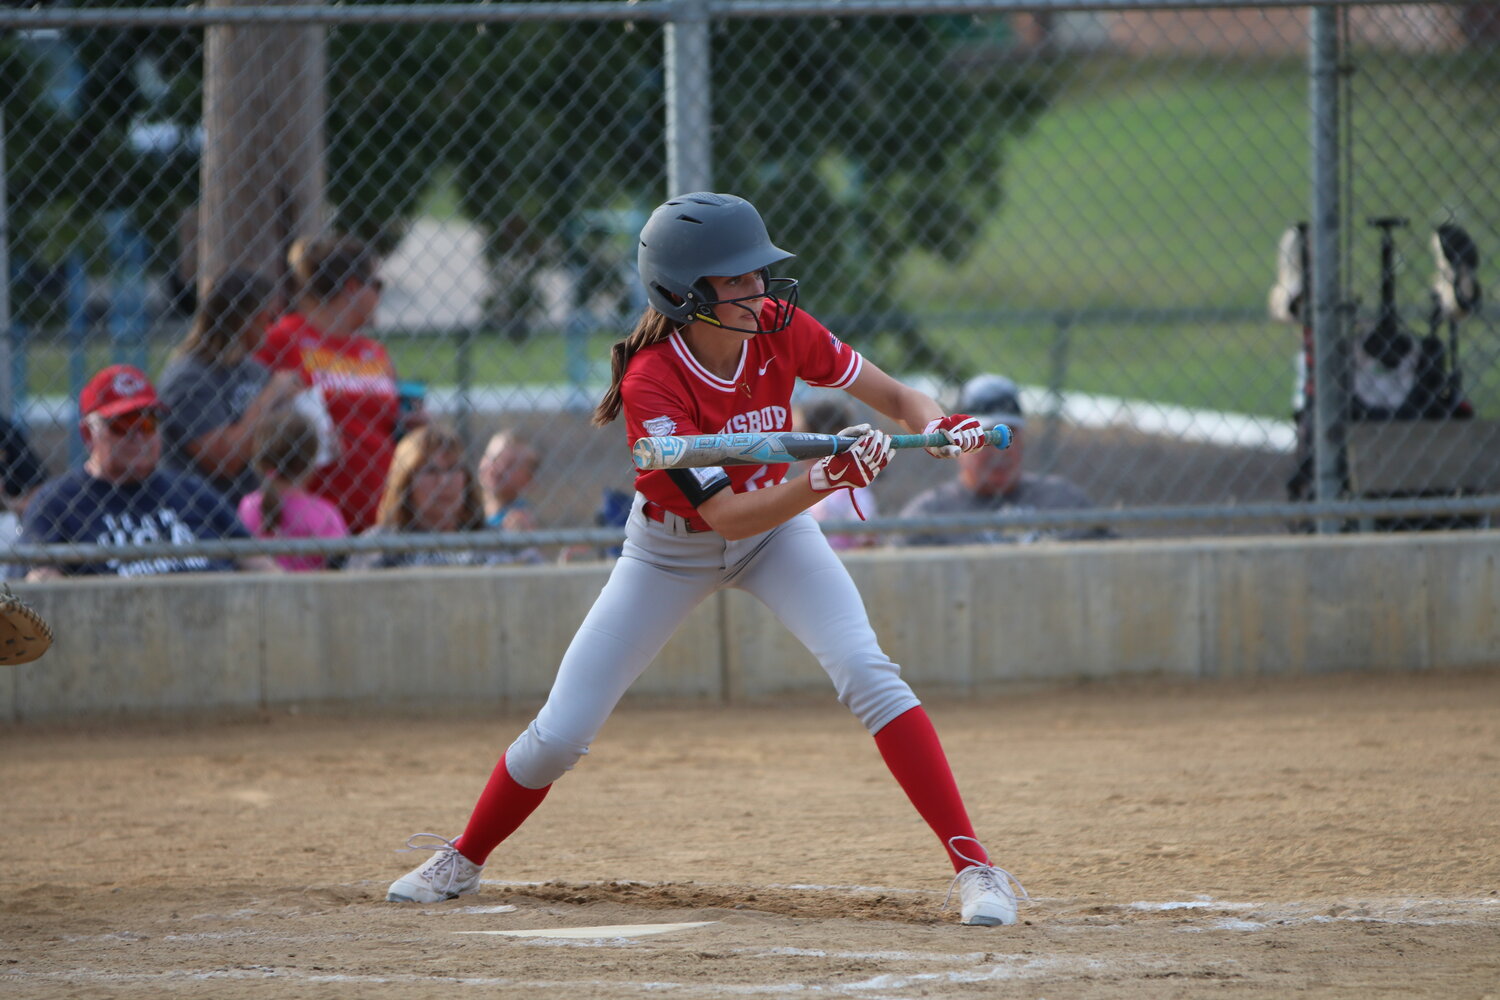 Junior Macie Ellis went 2-for-3, the only Harrisburg batter with two hits.